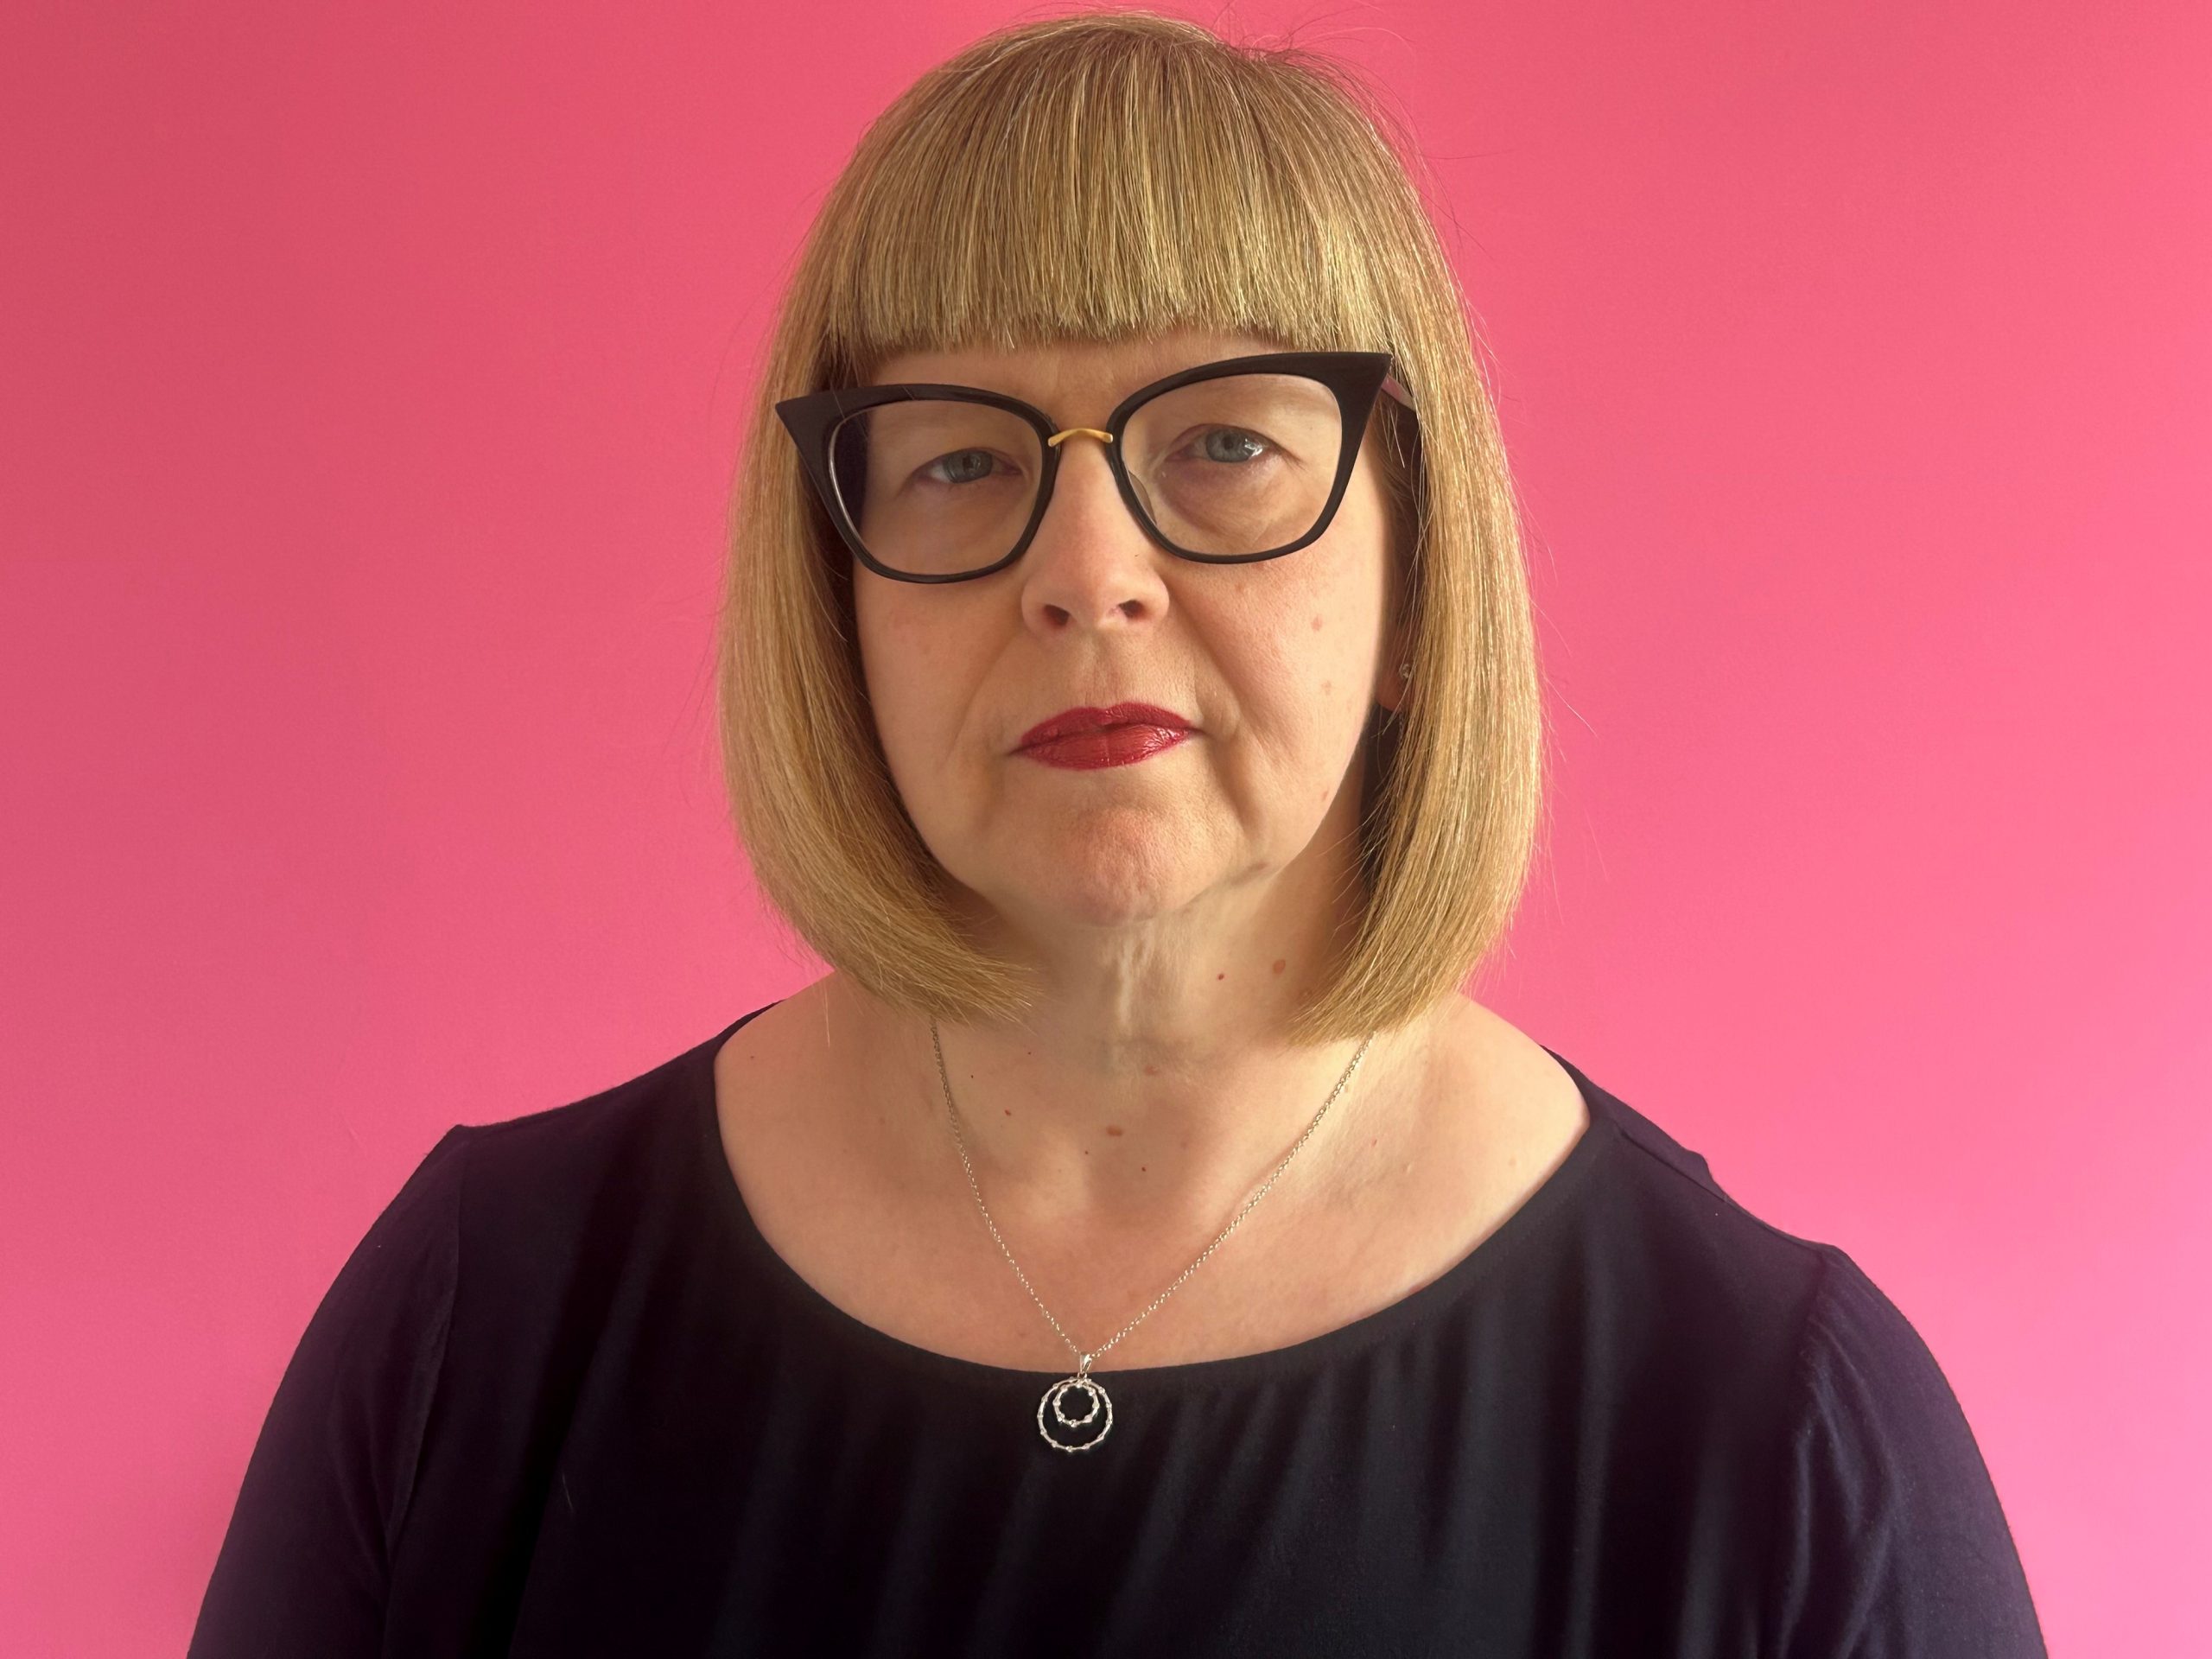 Photograph of Annabel Turpin, a woman in her early 50s, with a blond bob cut. She is wearing black glasses, red lipstick, and a dark purple top, and is standing in front of a pink background.